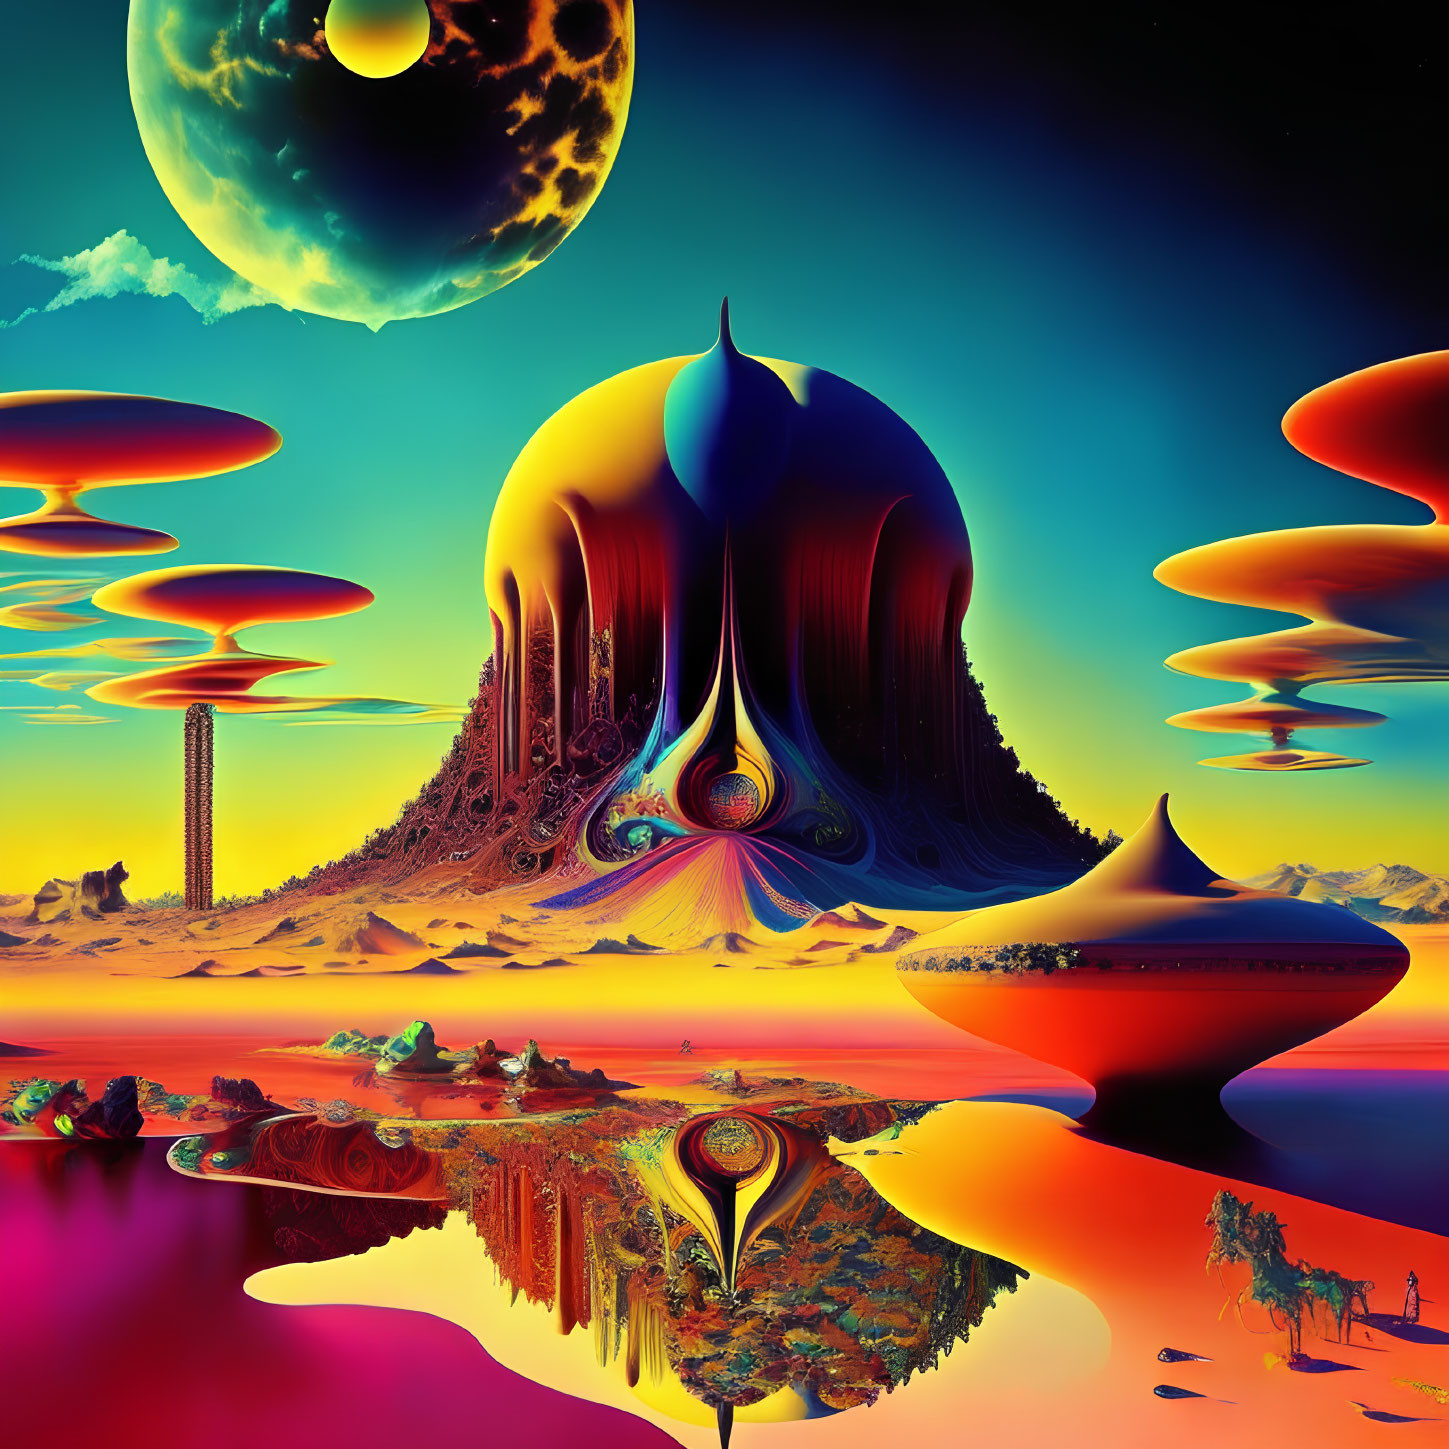 Surreal landscape with floating islands and bright colors